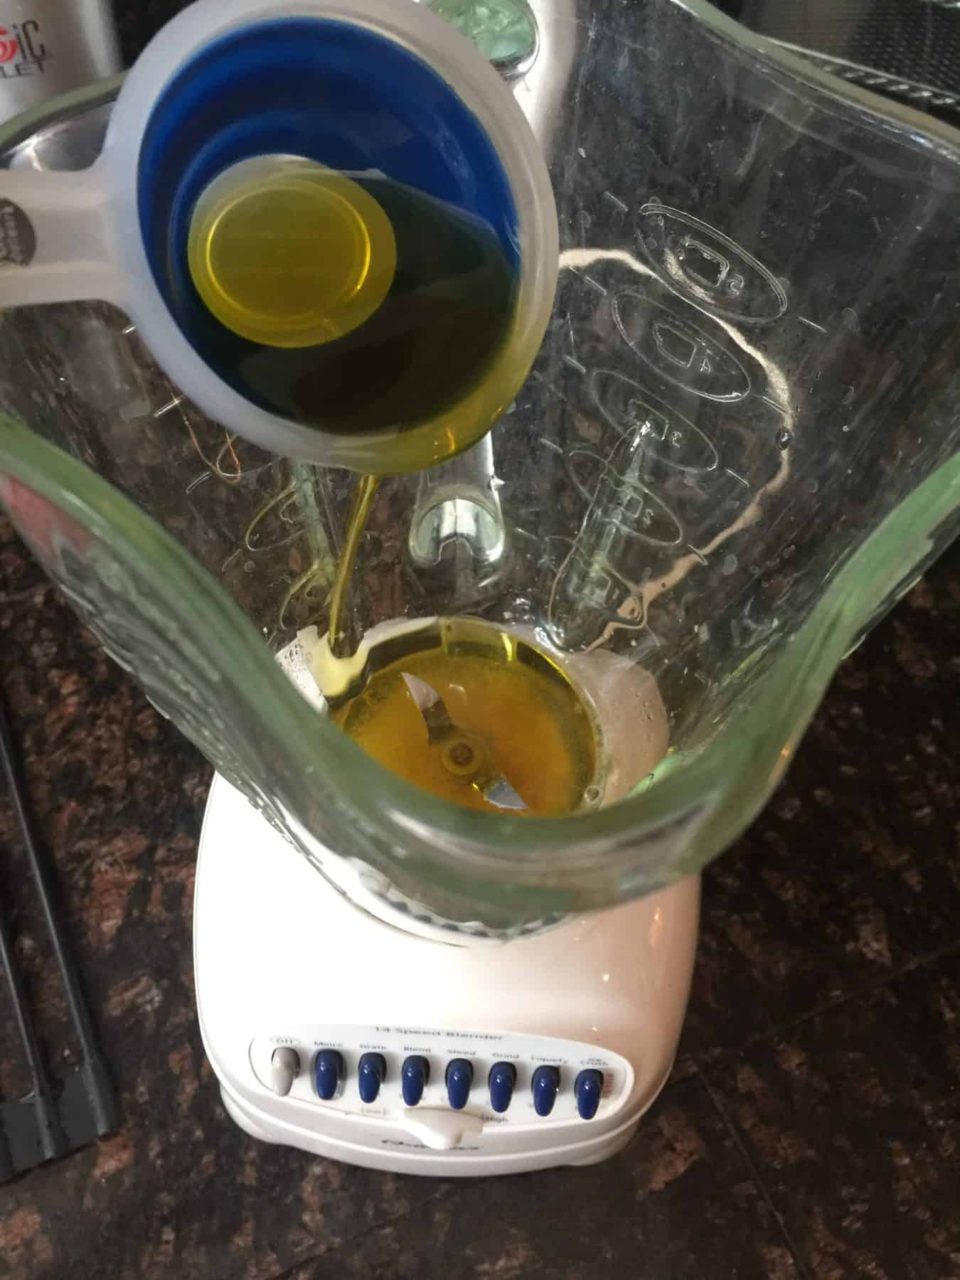 Blender with olive oil being added.